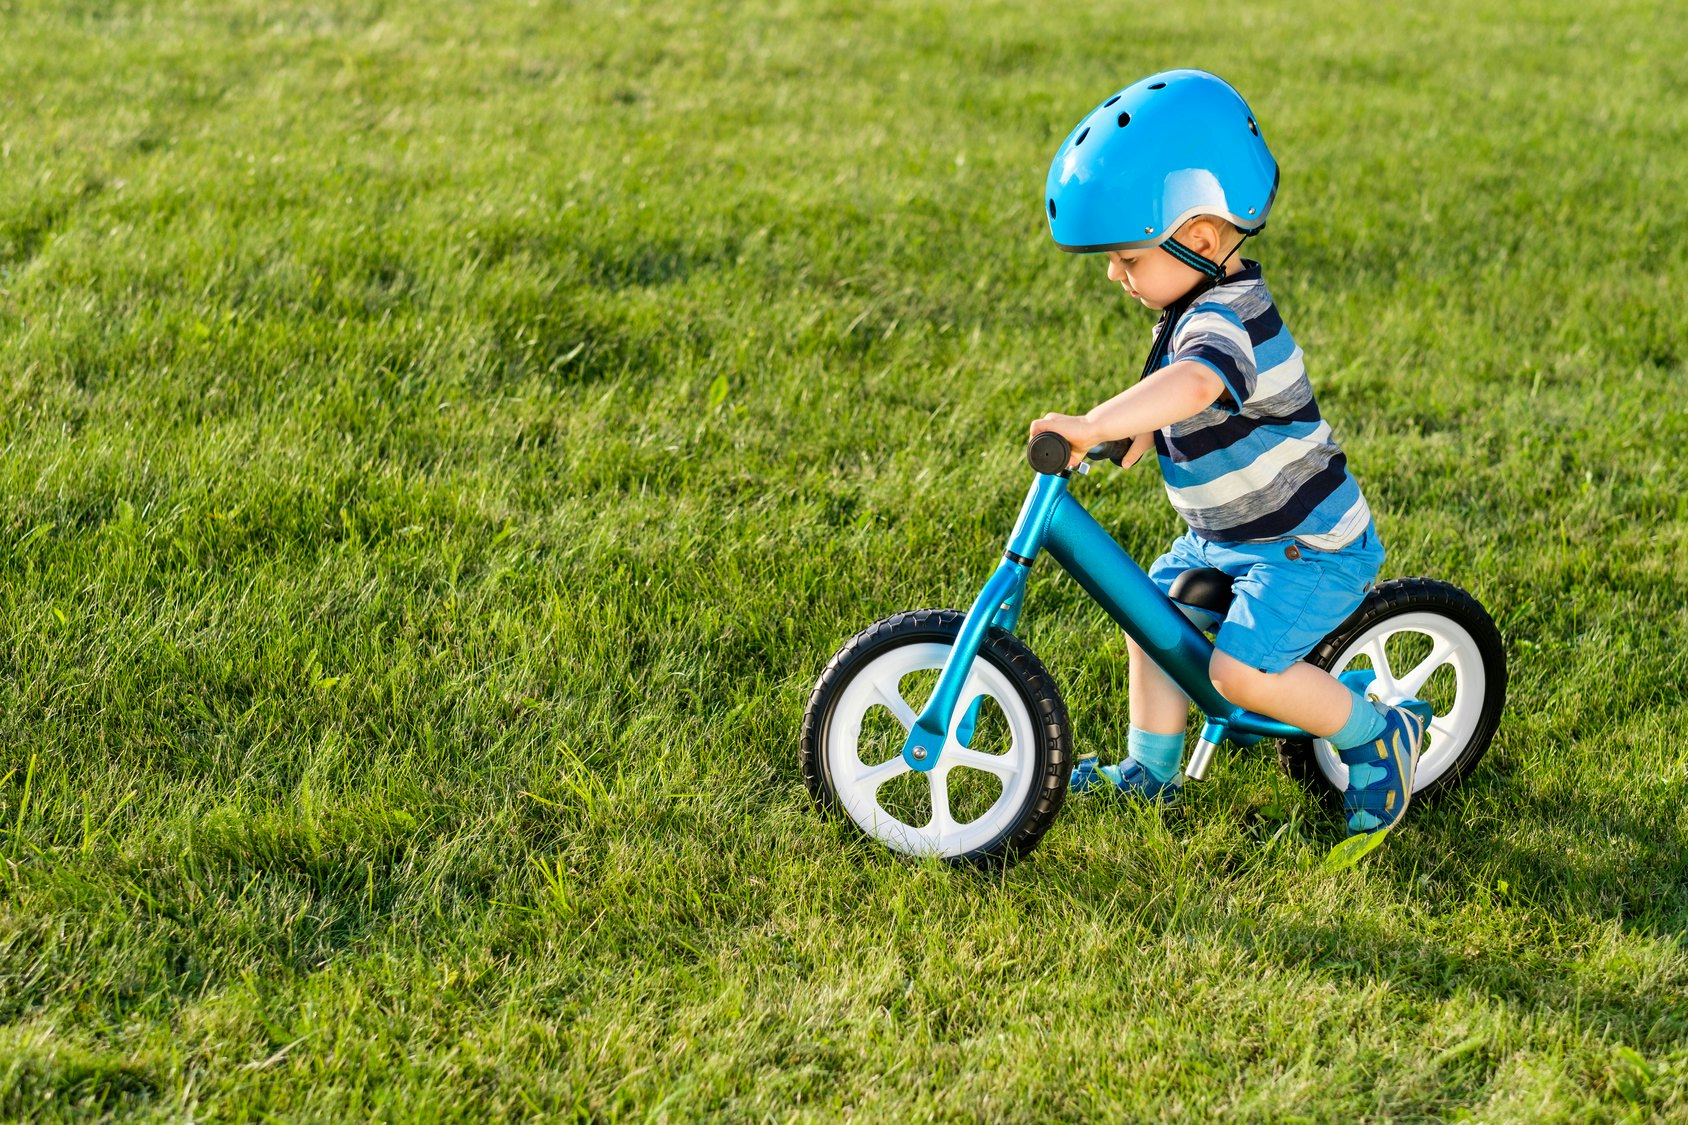 what age is good for a balance bike